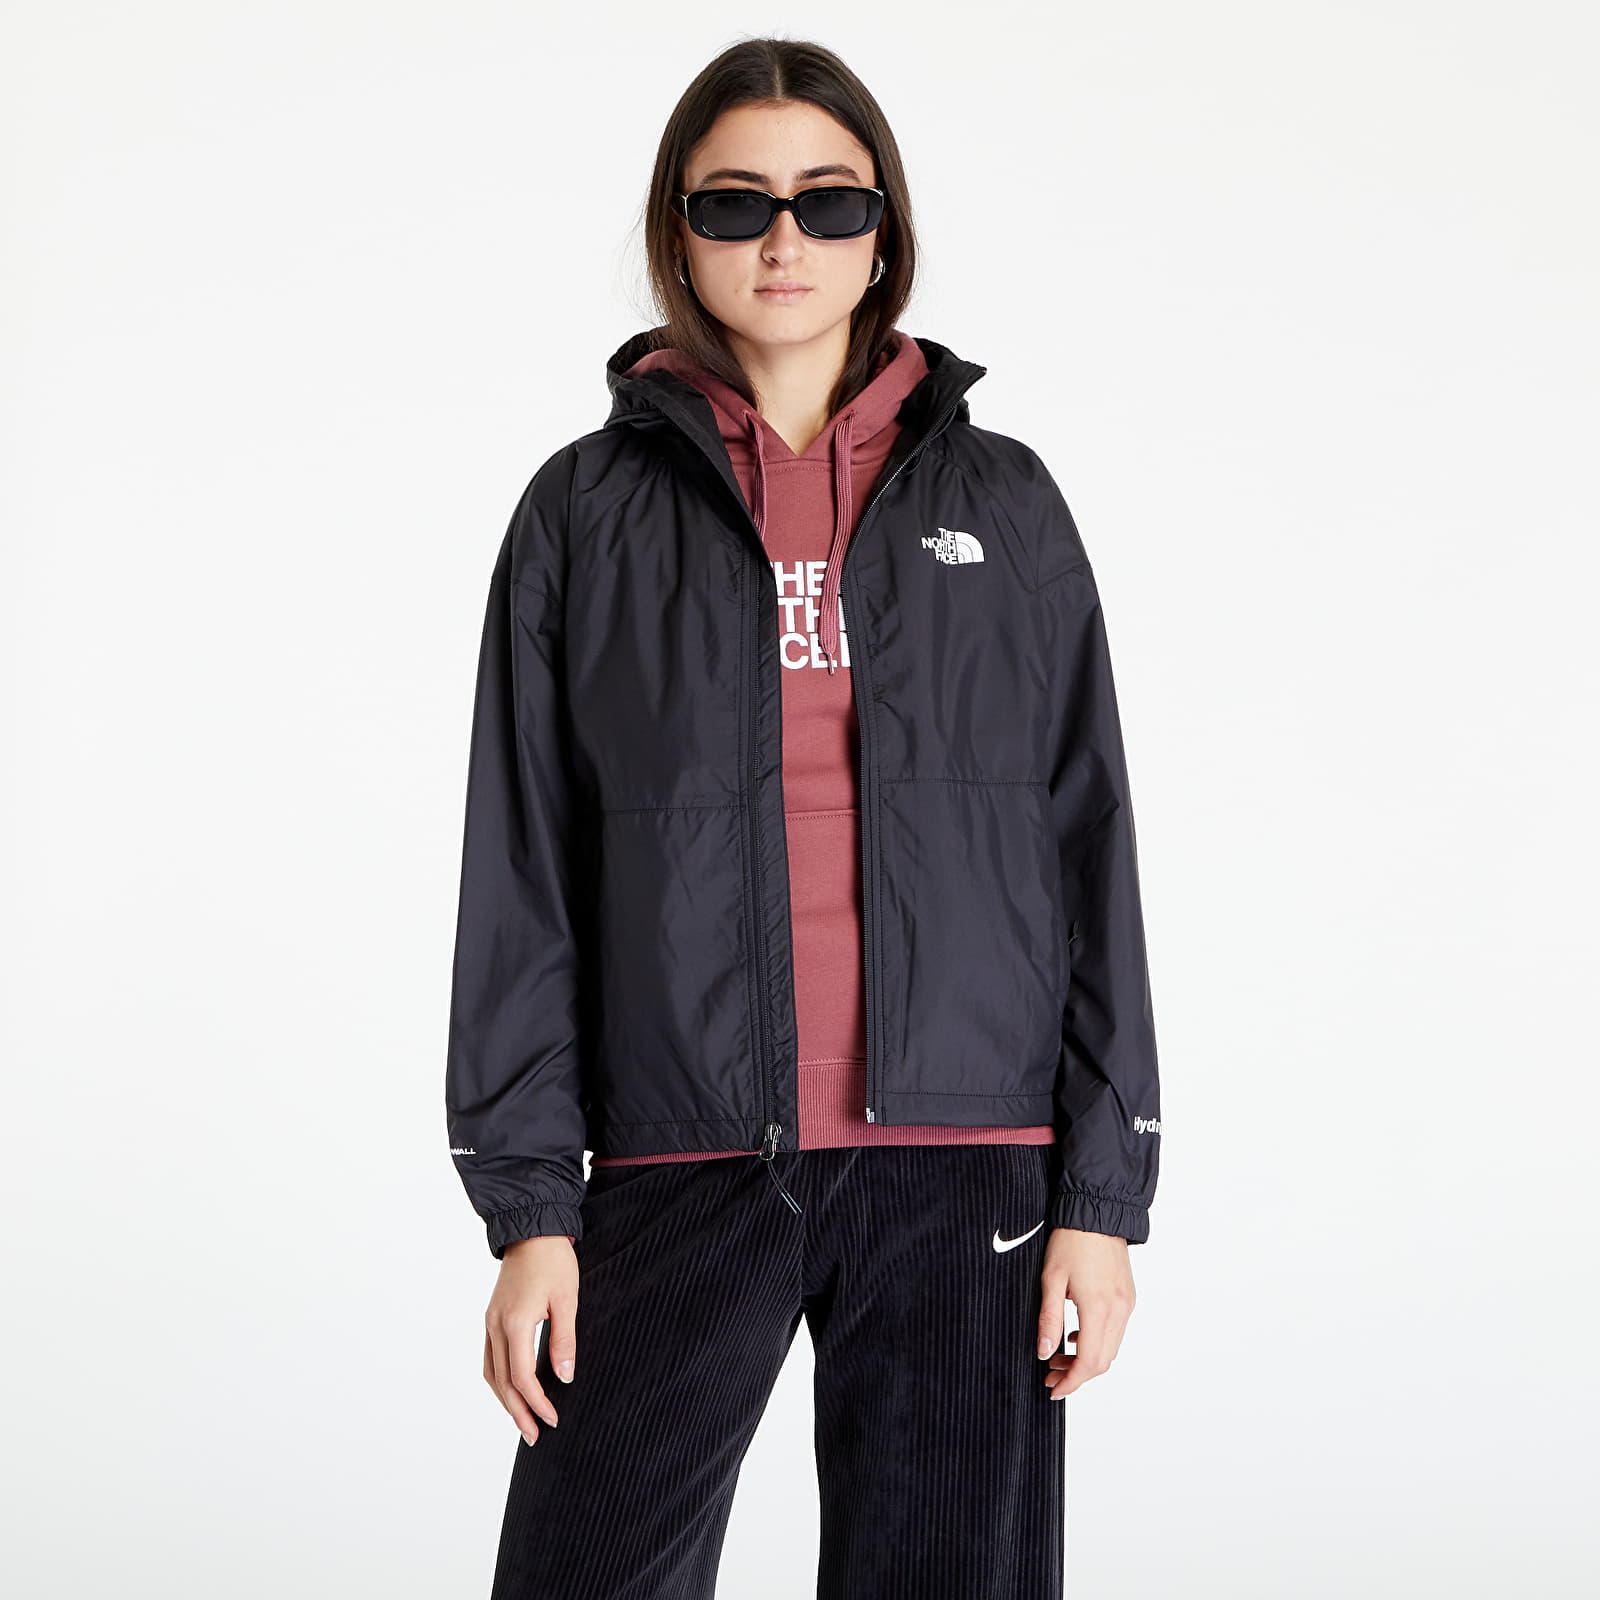 Jakne The North Face Hydrnlne Jacket Black